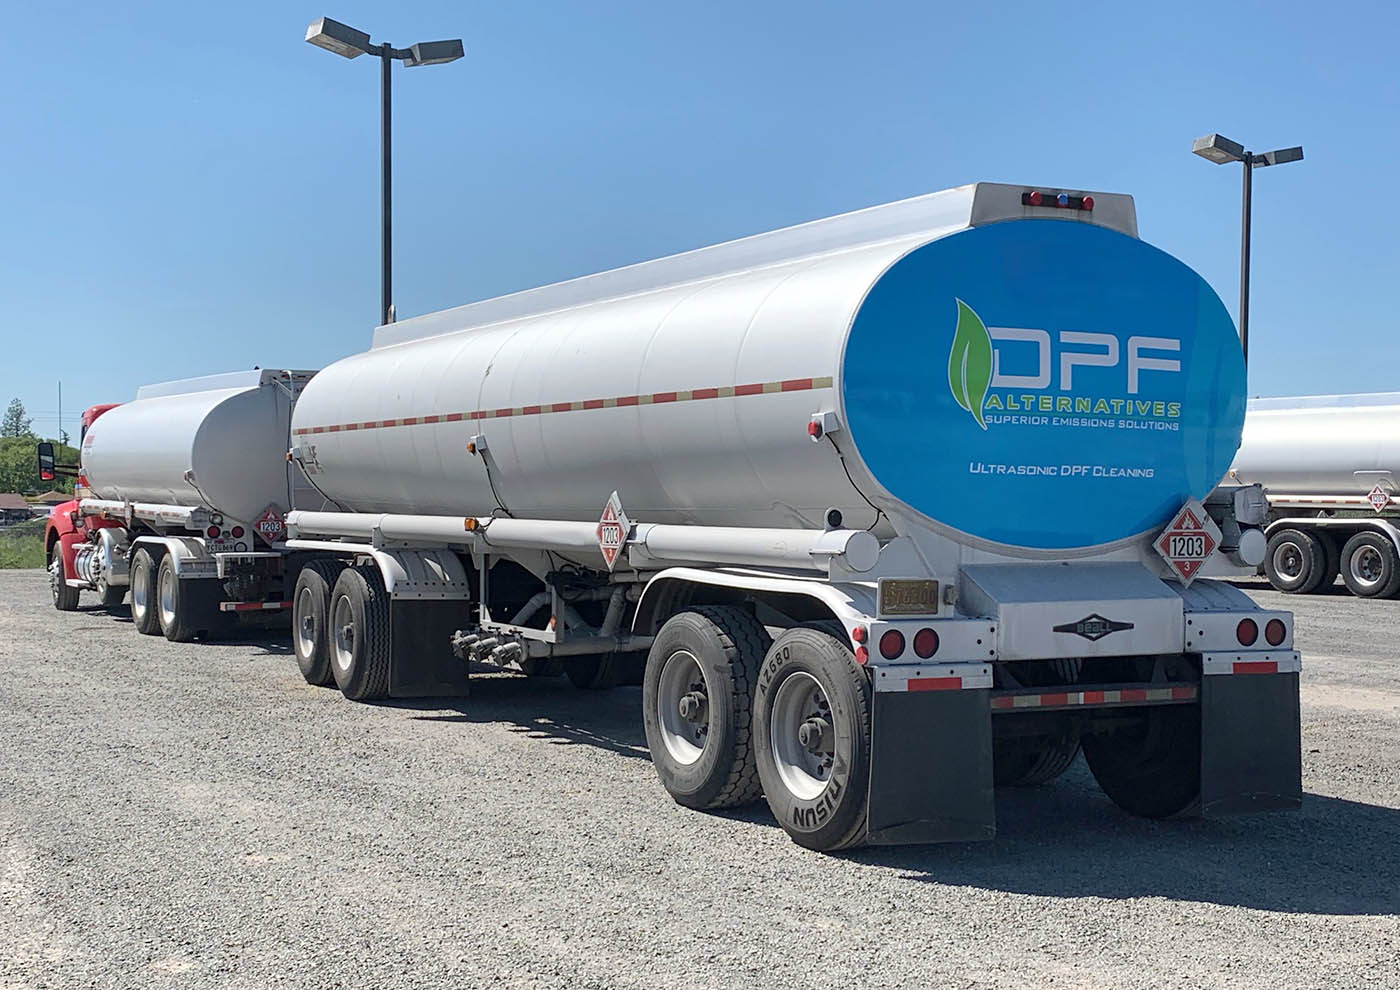 A diesel truck with the dpf logo on the back - your full service dpf shop in Jonesboro / Paragould, AR.